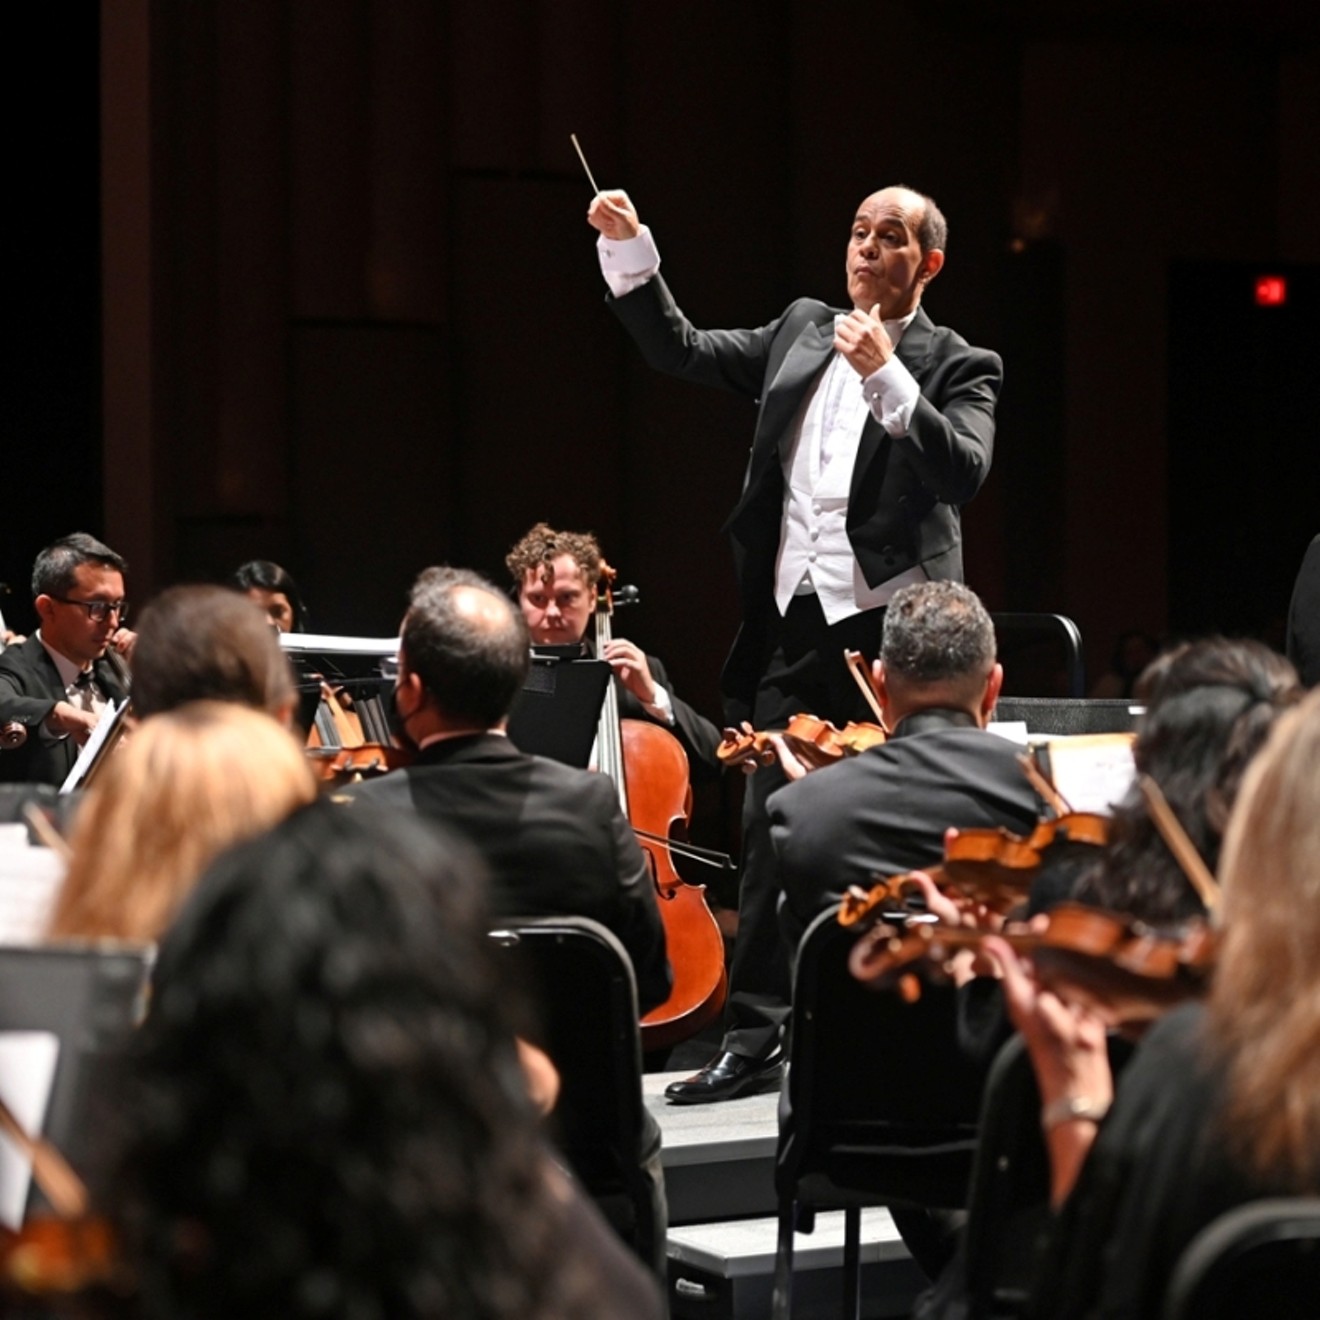 The Houston Latin American Philharmonic
Orchestra returns to Miller Outdoor Theatre.